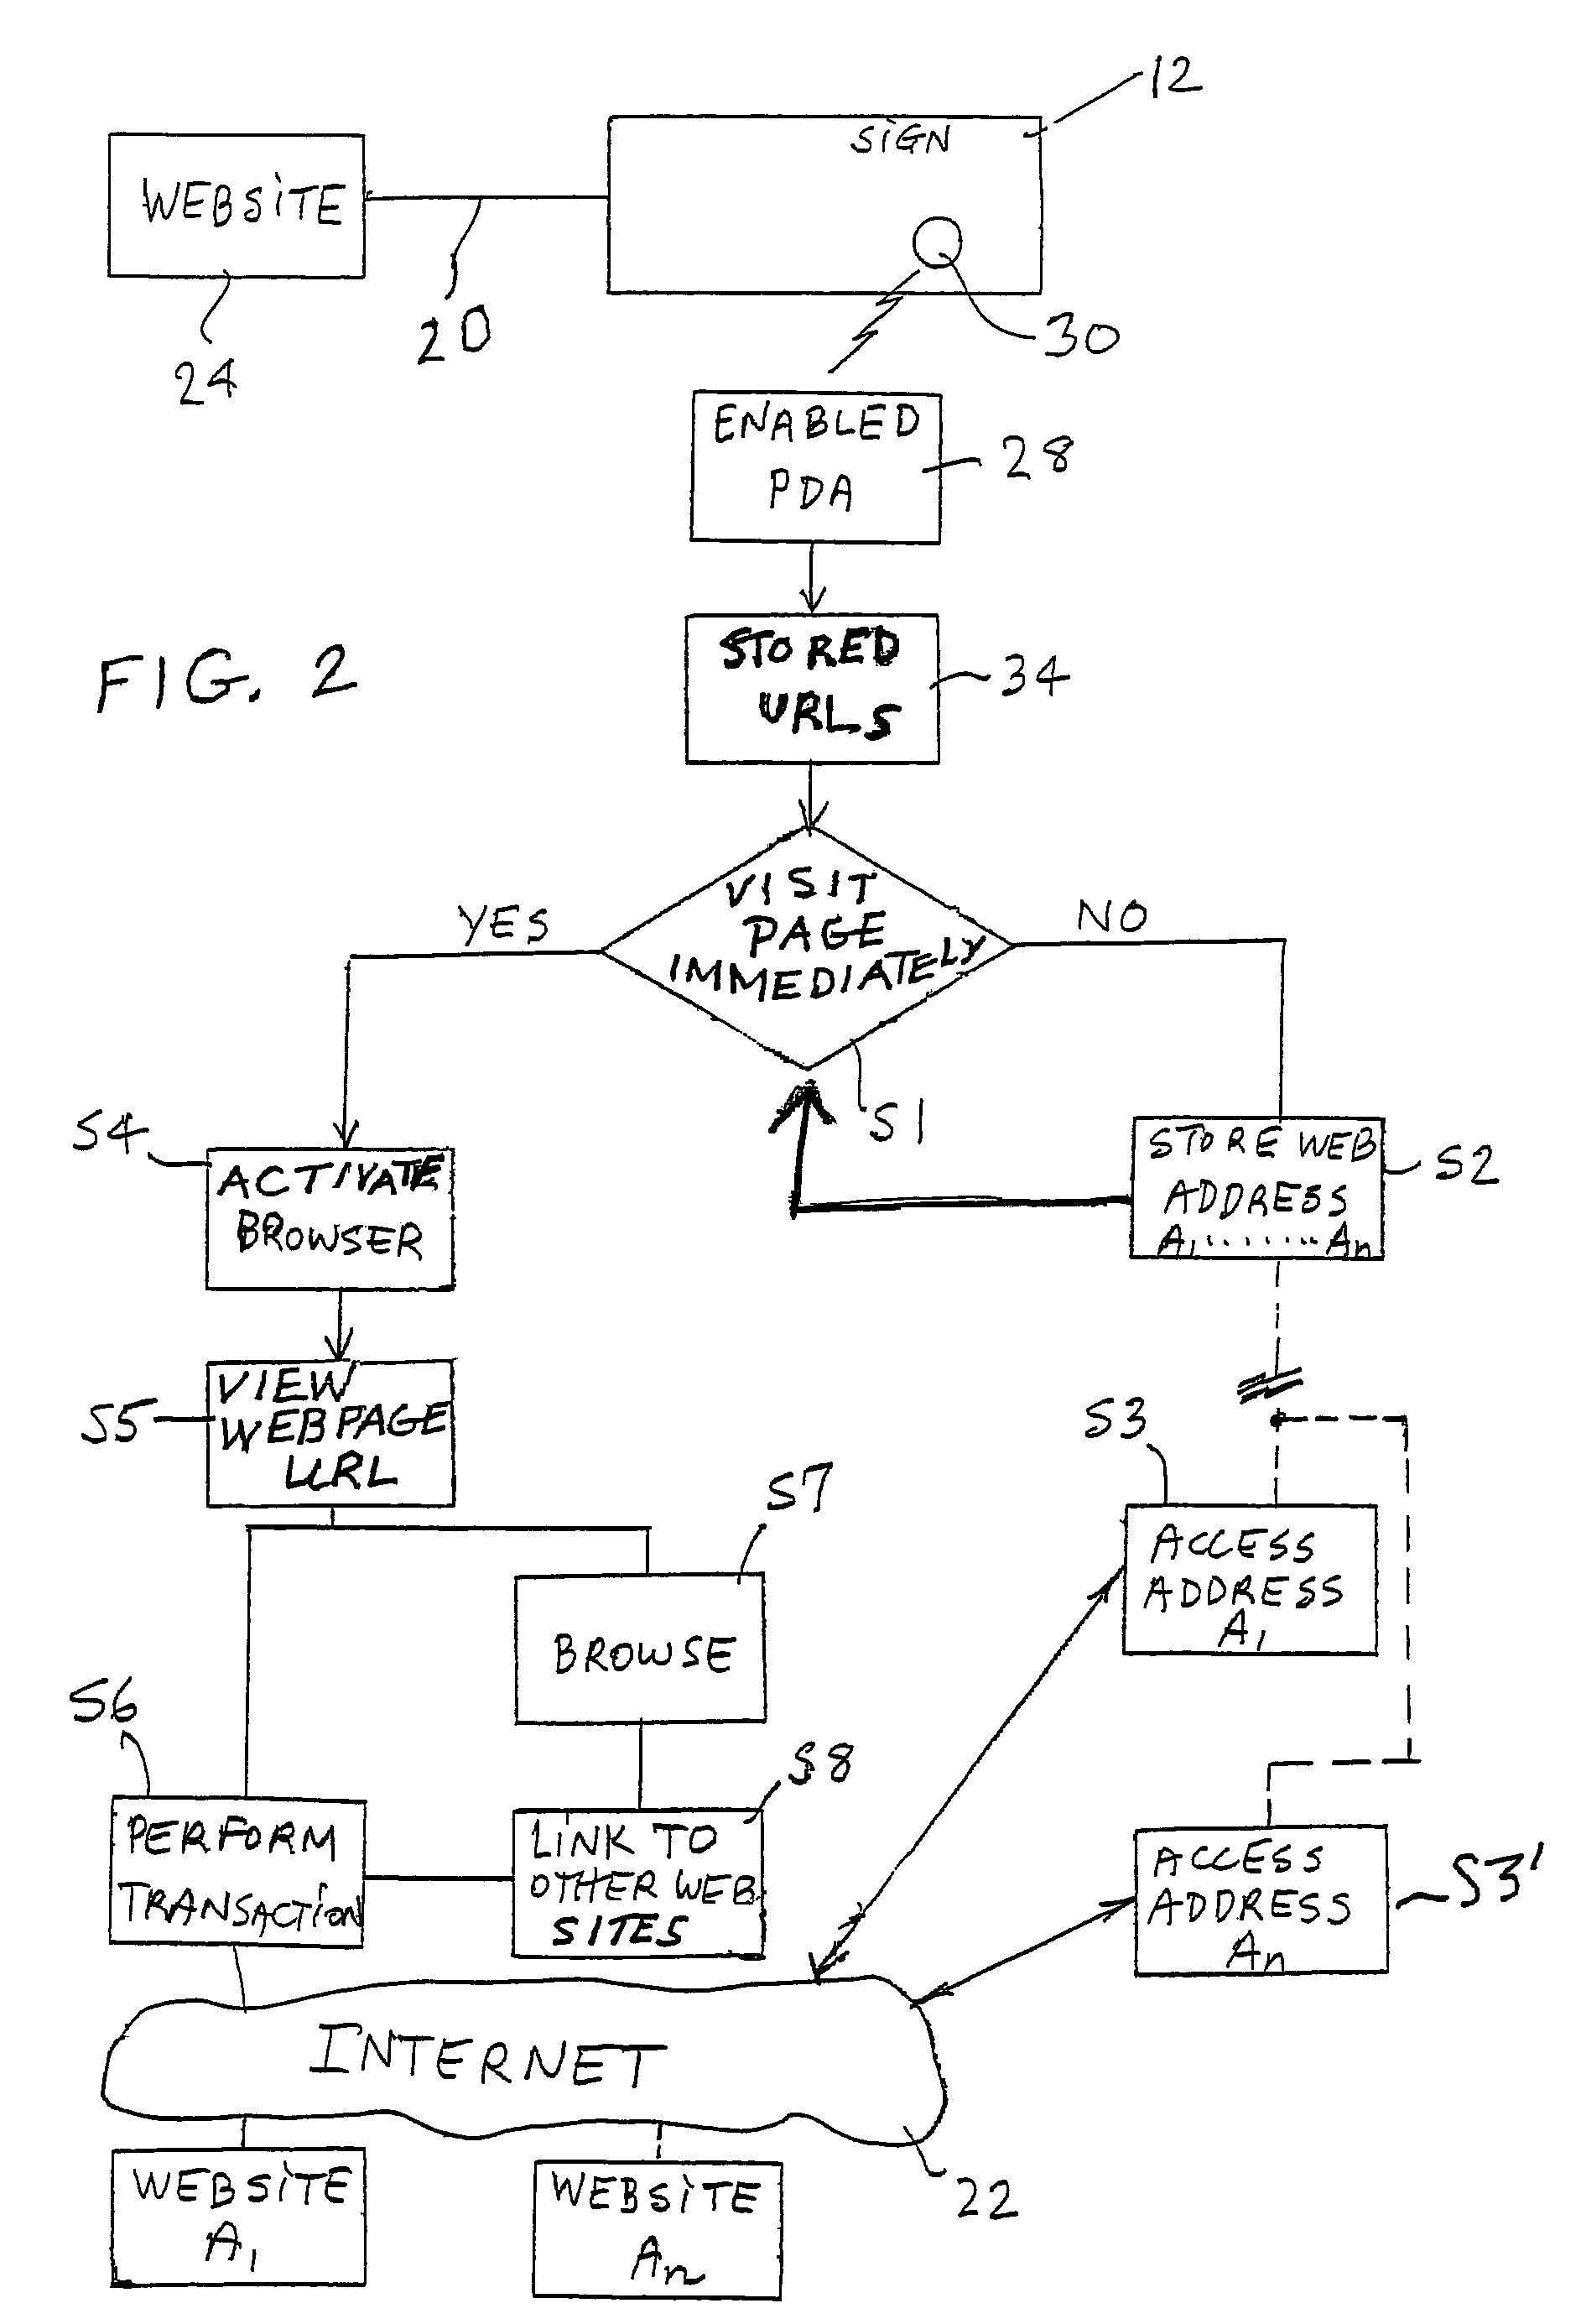 System and method of facilitating the dissemination of information by means of active advertisements in portable information transceivers